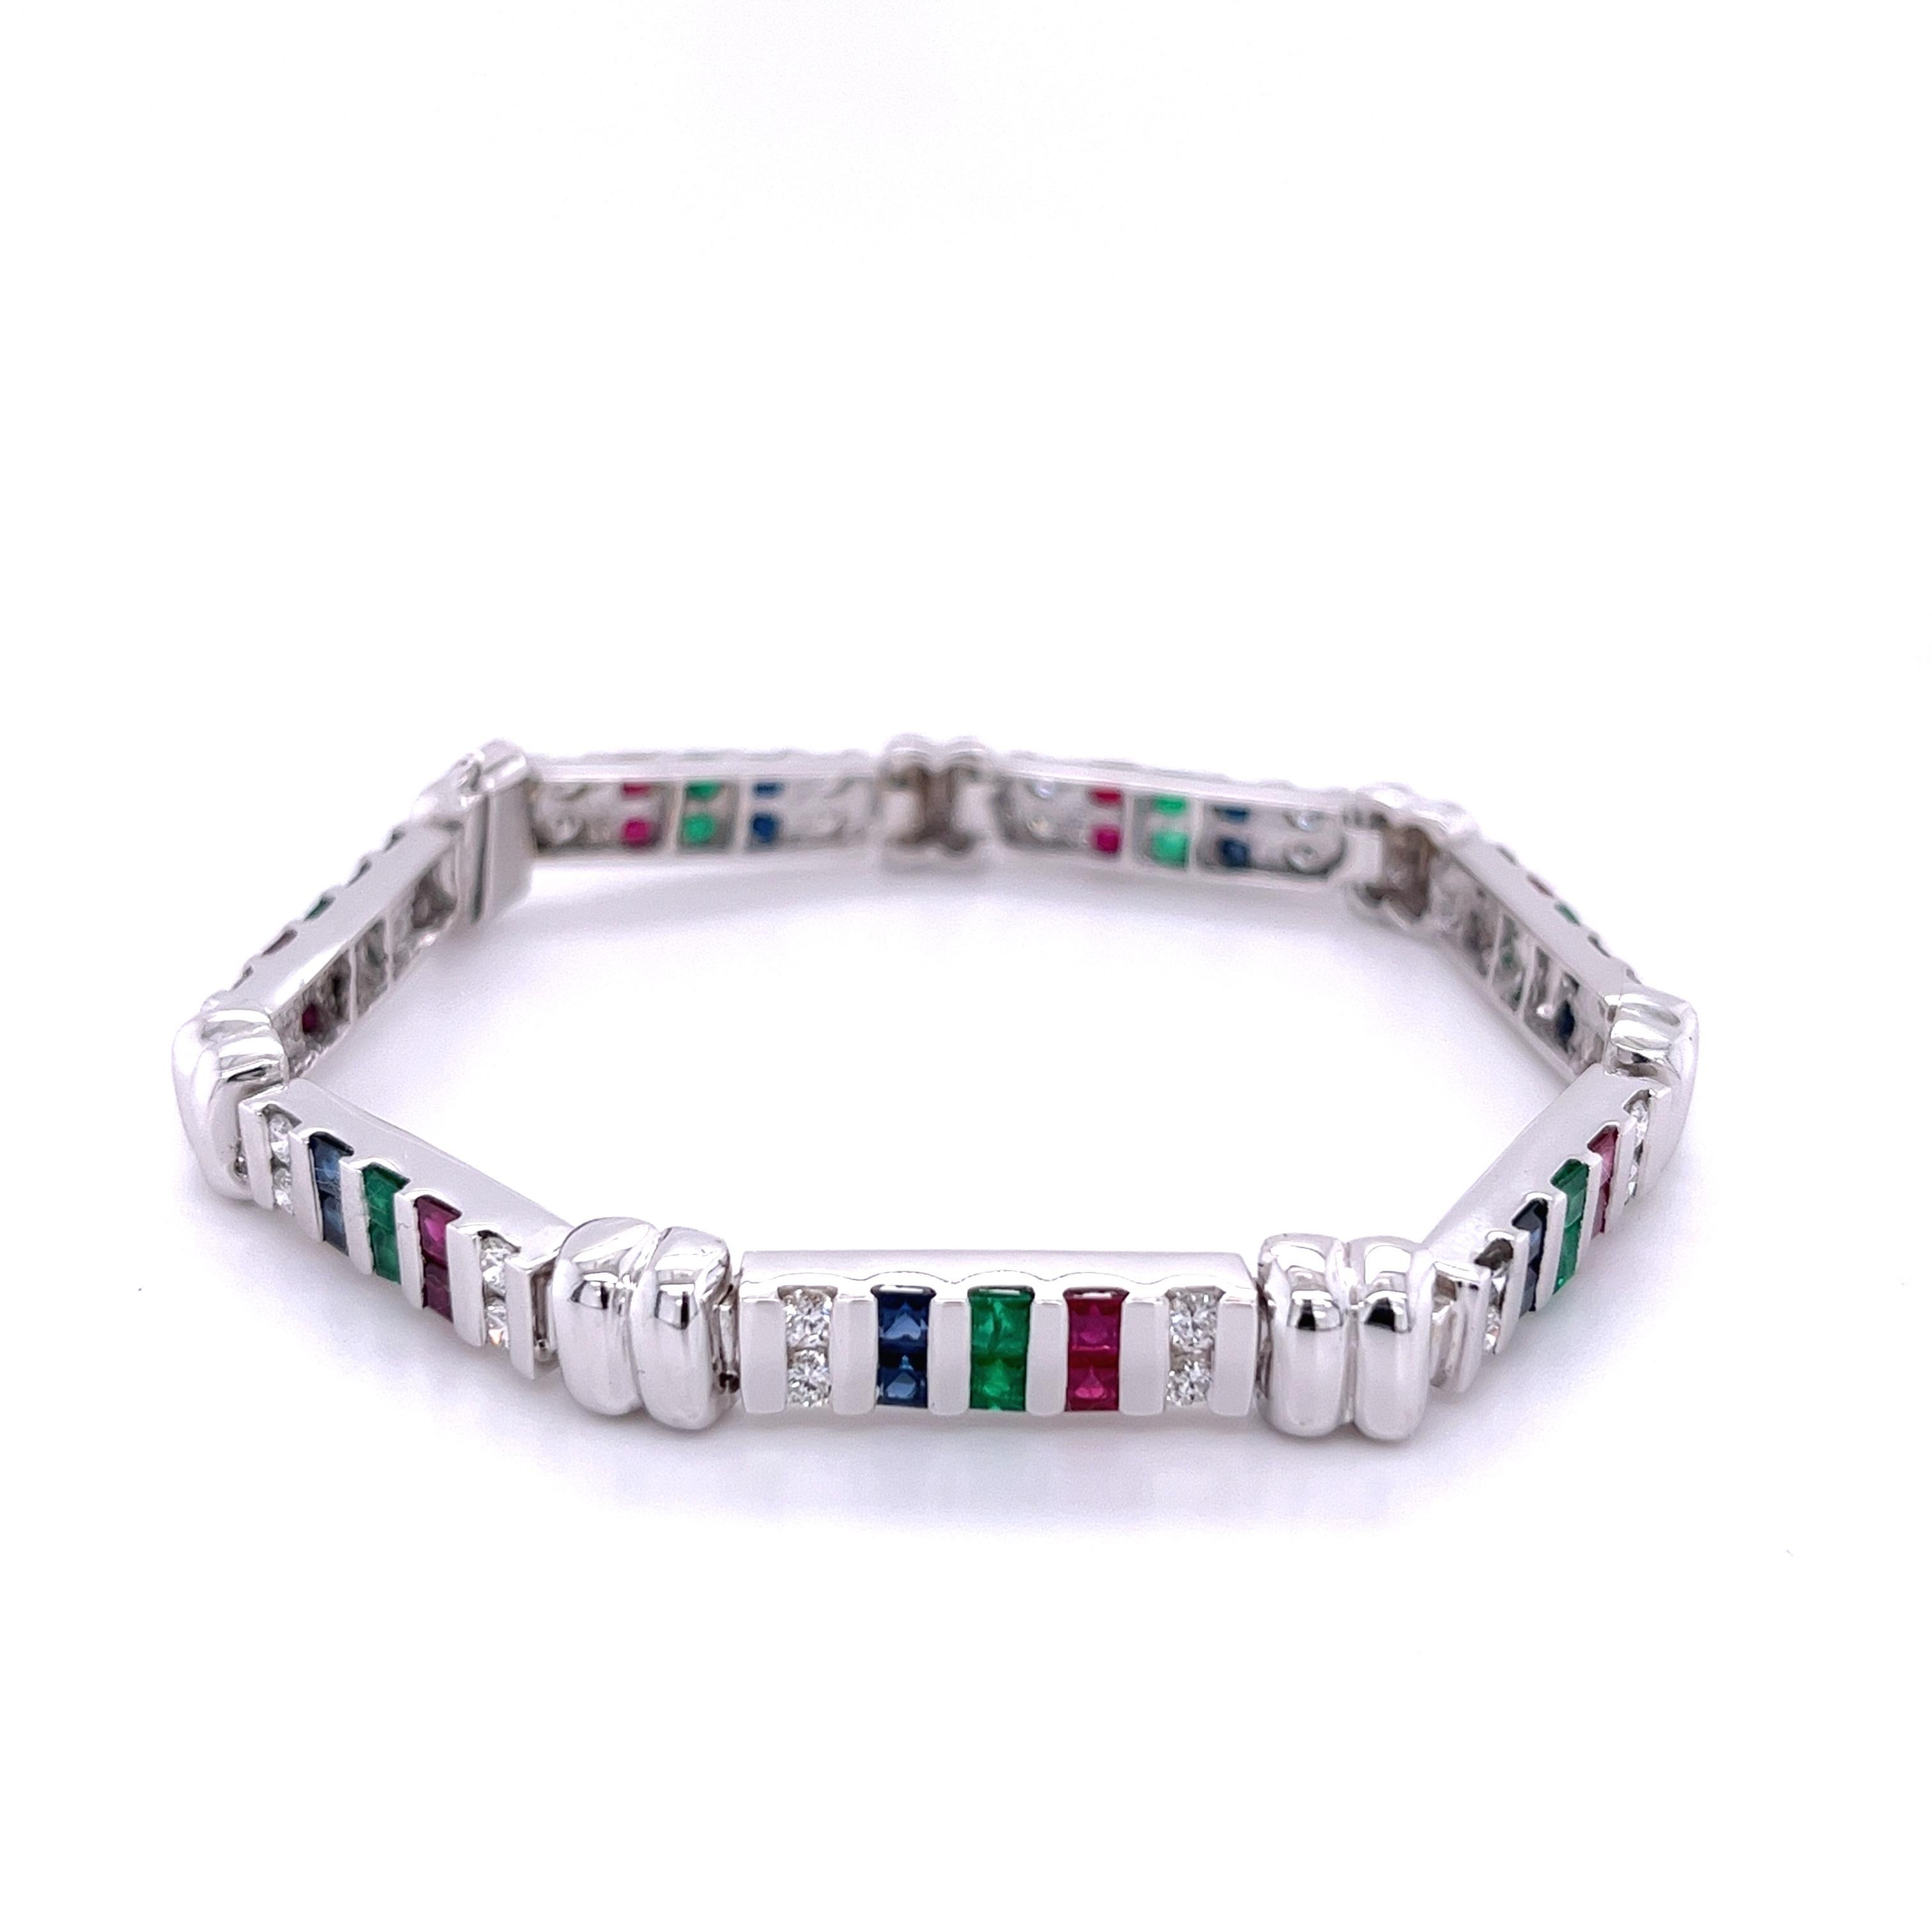 12 Carat Diamond, Ruby, Emerald and Sapphire 18K White Gold Bracelet In Excellent Condition For Sale In Miami, FL